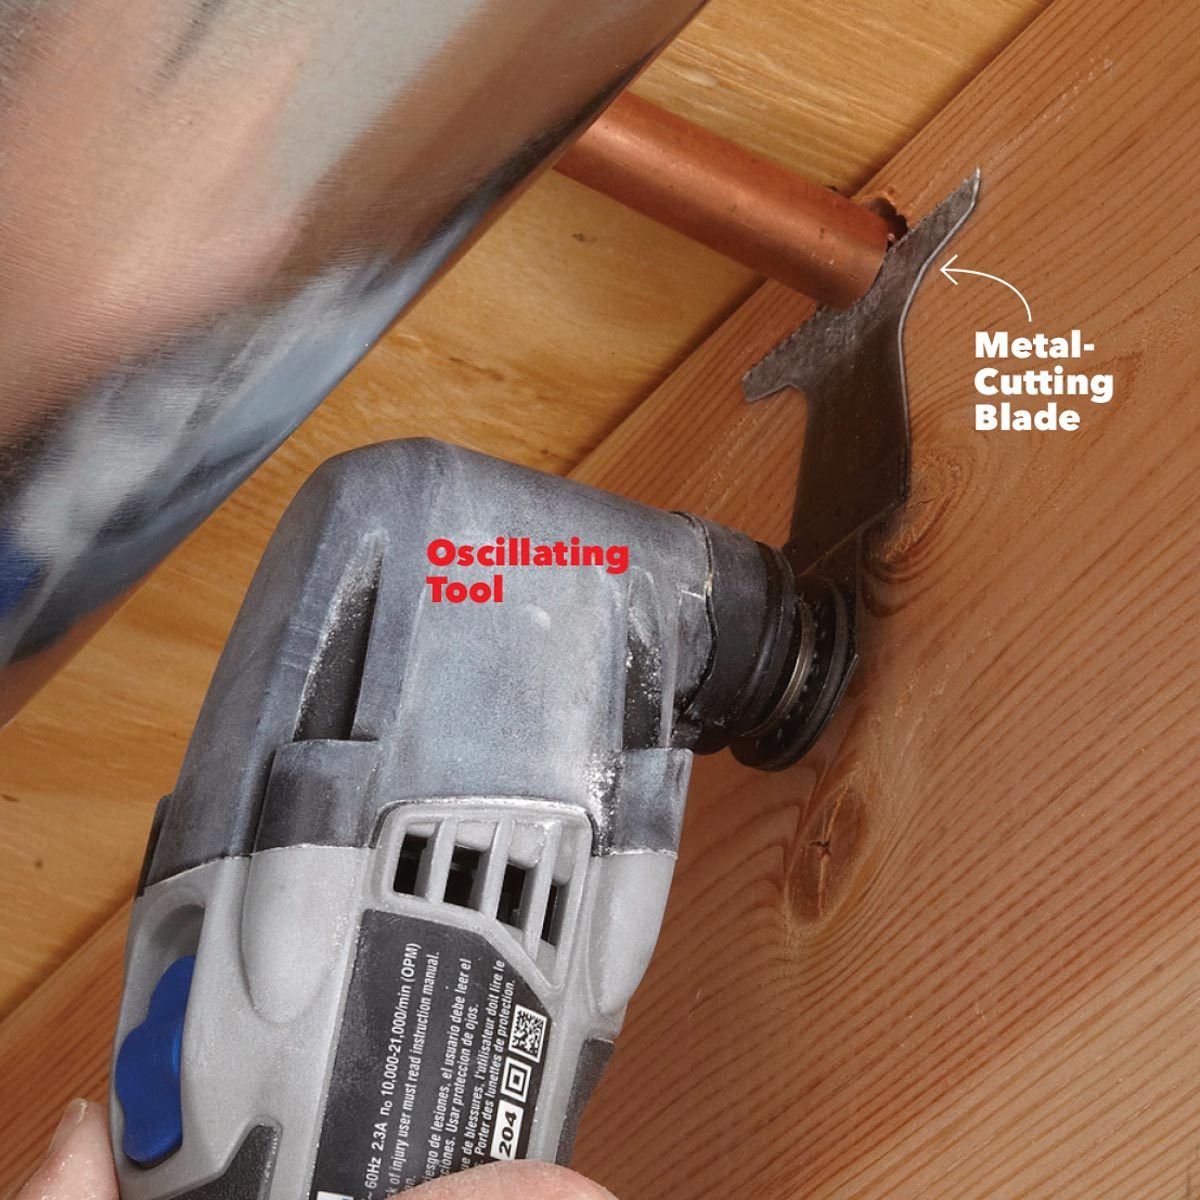 Get into tight spots with an oscillating tool